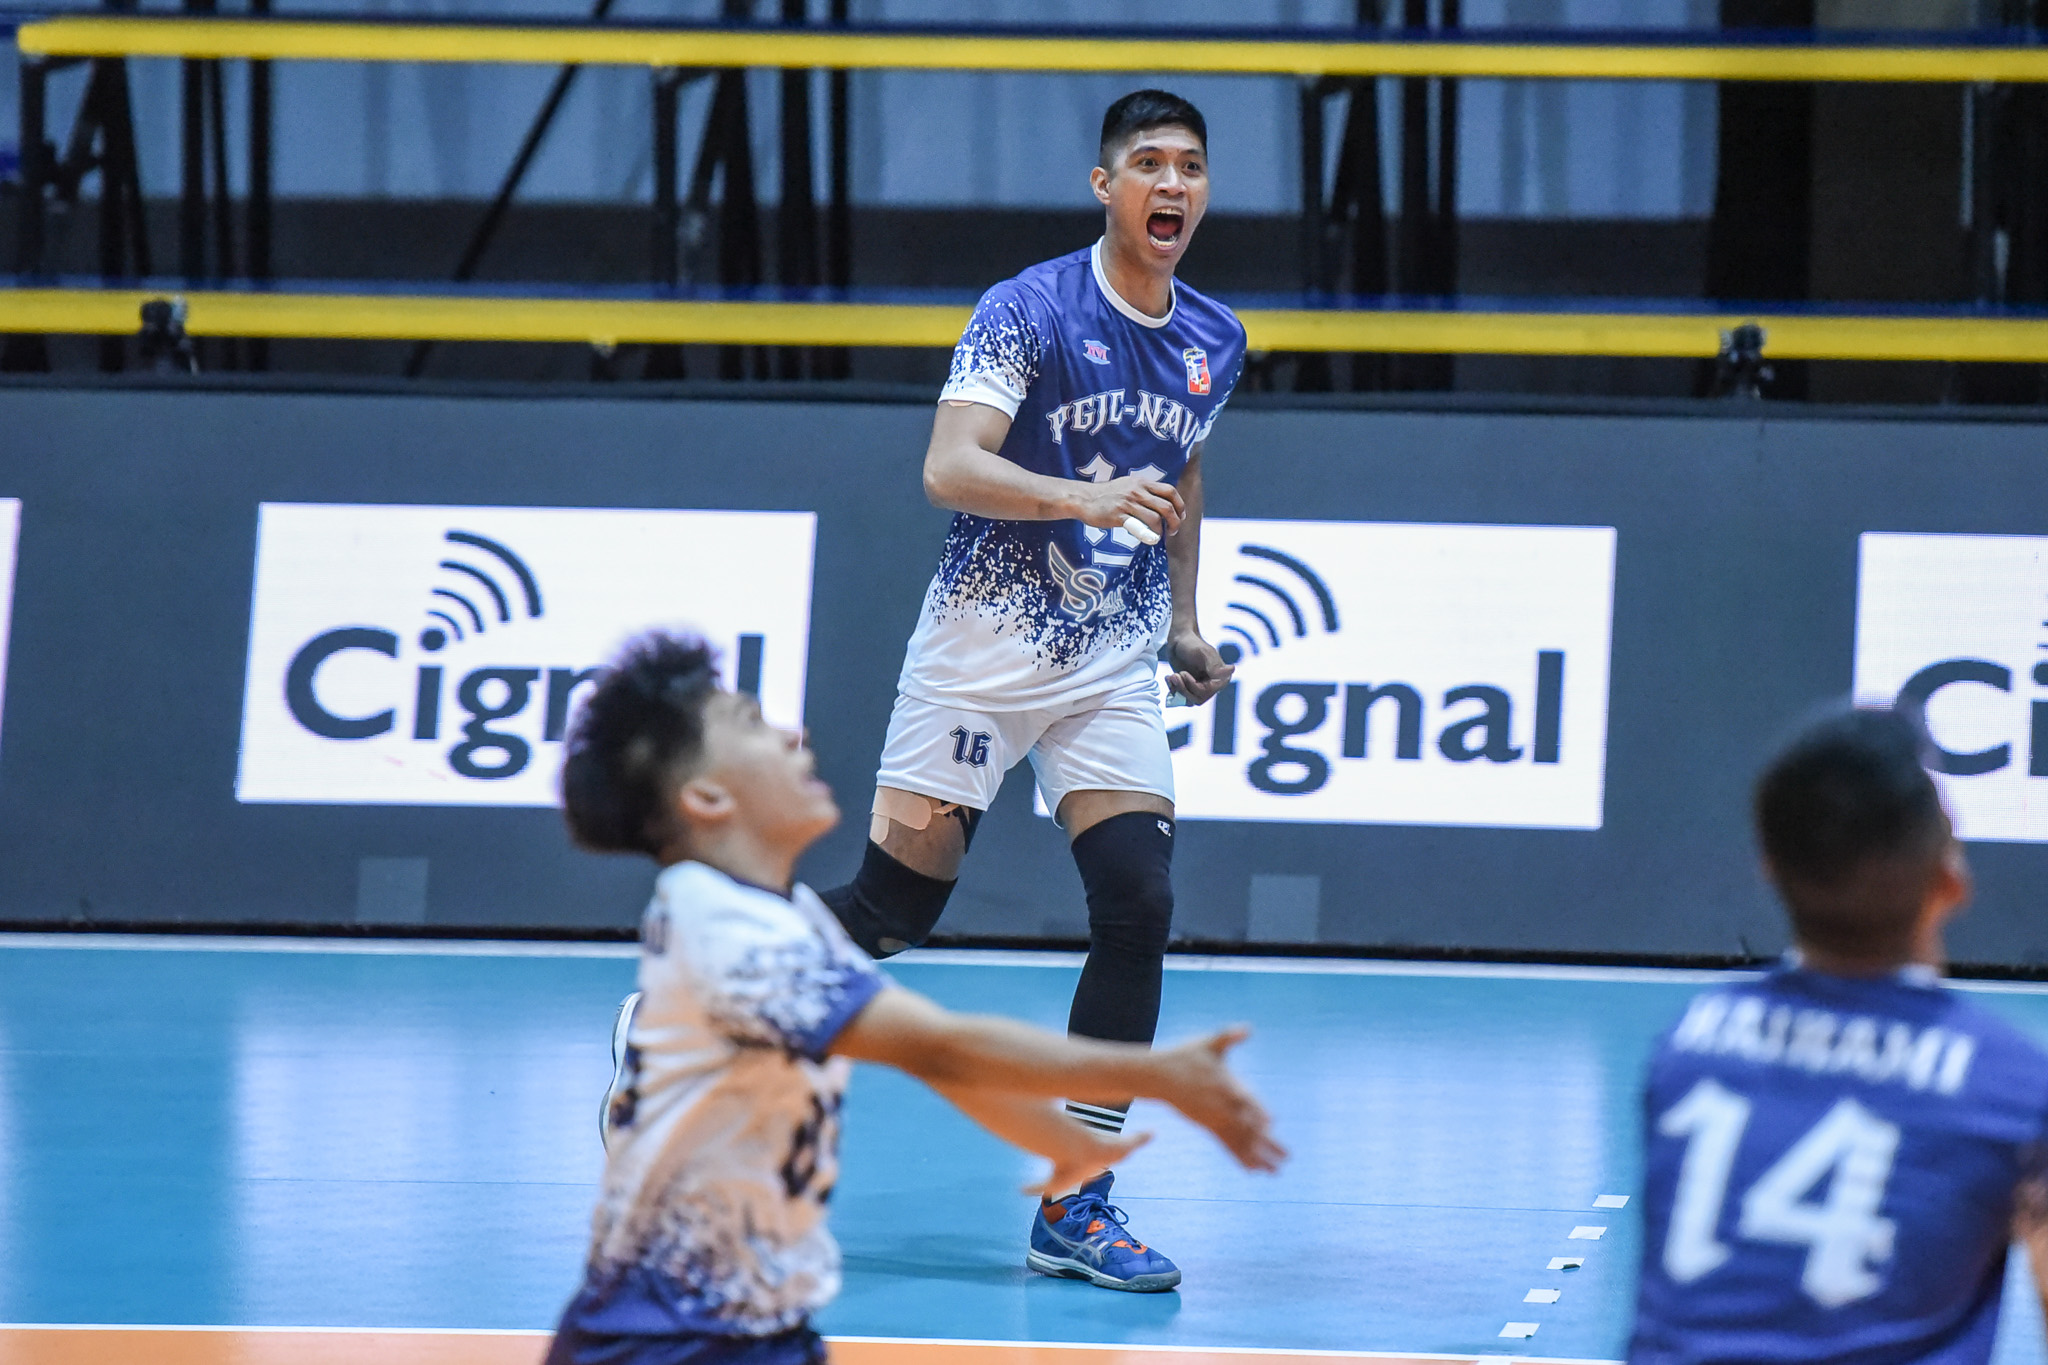 Navy's Greg Dolor in the Spikers' Turf. –PVL IMAGES